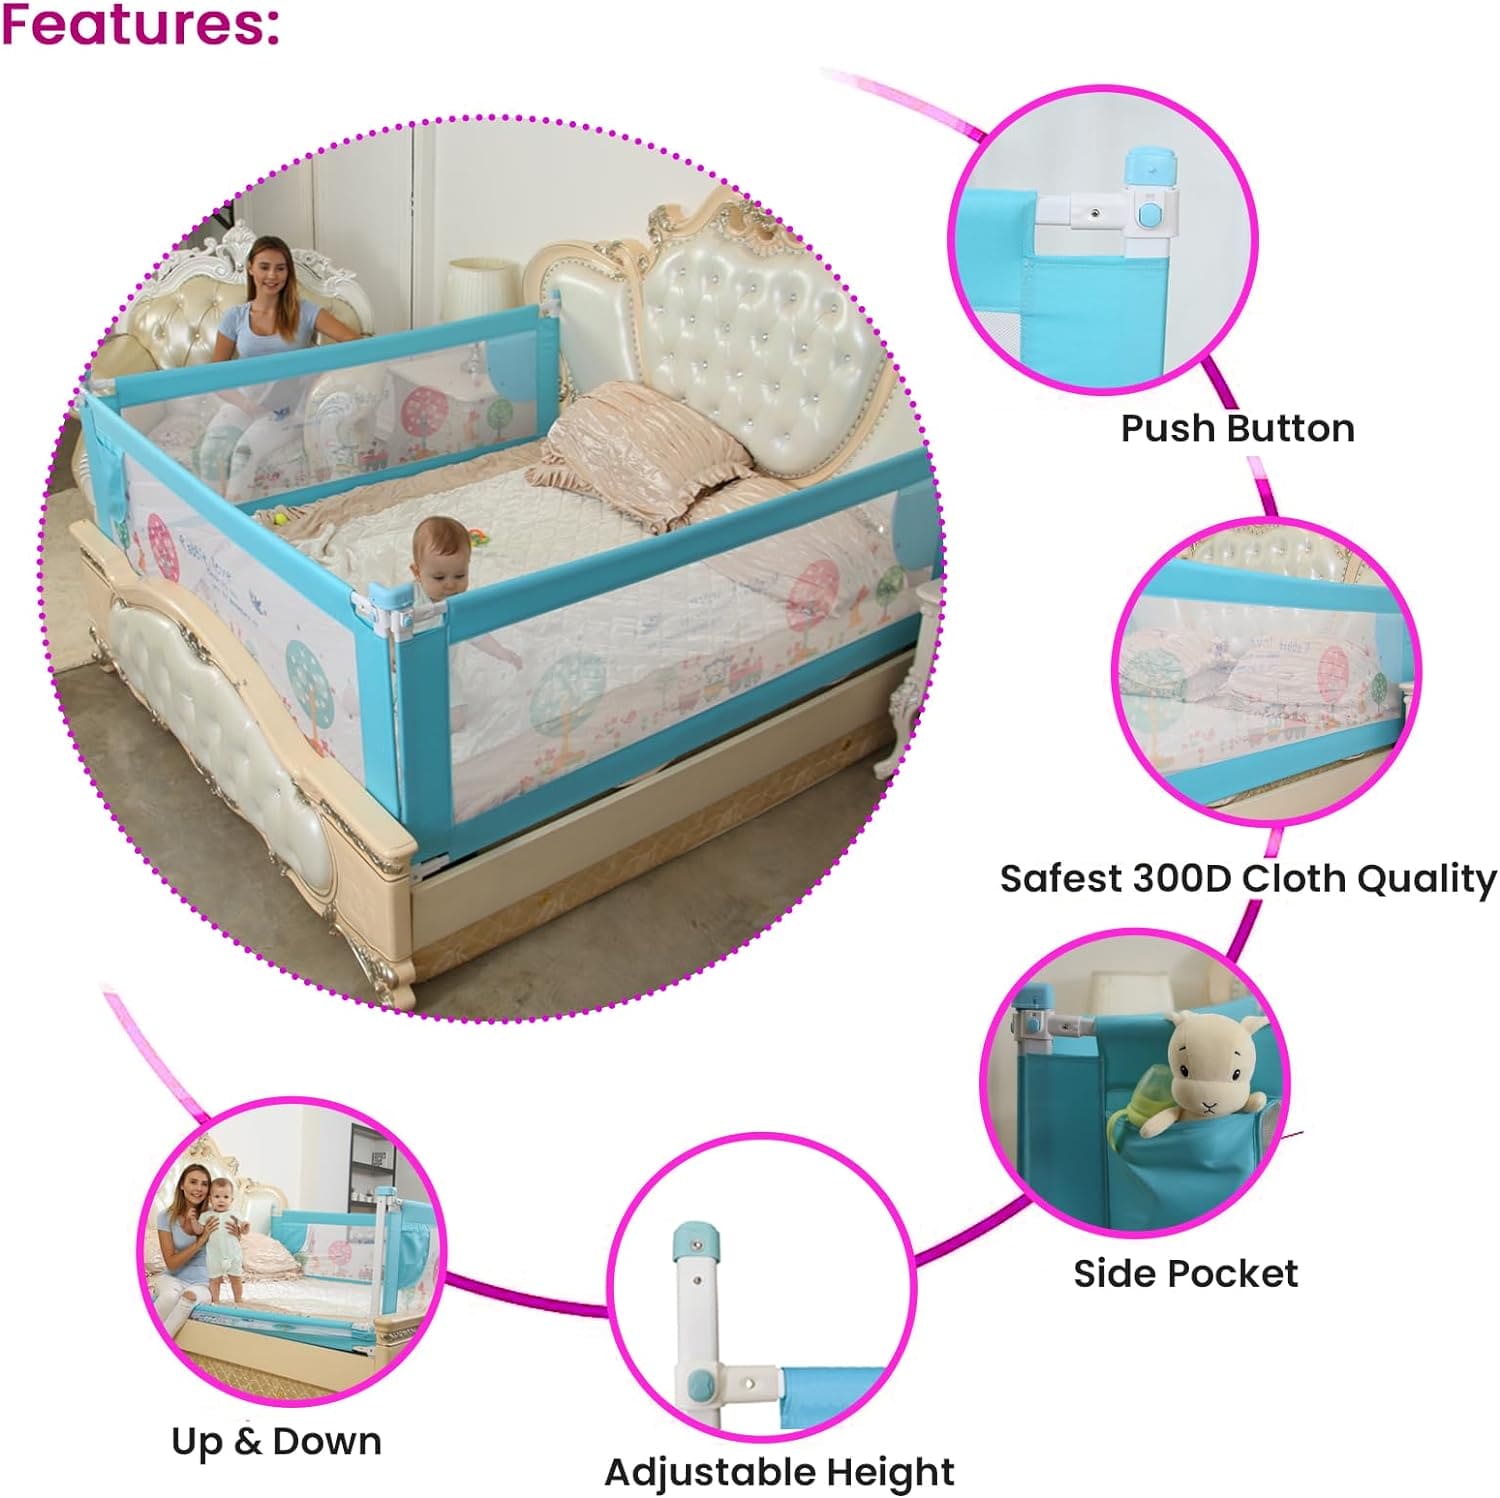 Children Bed Barrier, Baby Bed Safety Guard, Fence Guardrail Security, Foldable Baby Bed Fencing Gate, Crib Adjustable Safety Kids Rails, Safety Protection Guard Beige for Toddler, Up & Down Falling Protector Bed Rails for Kids